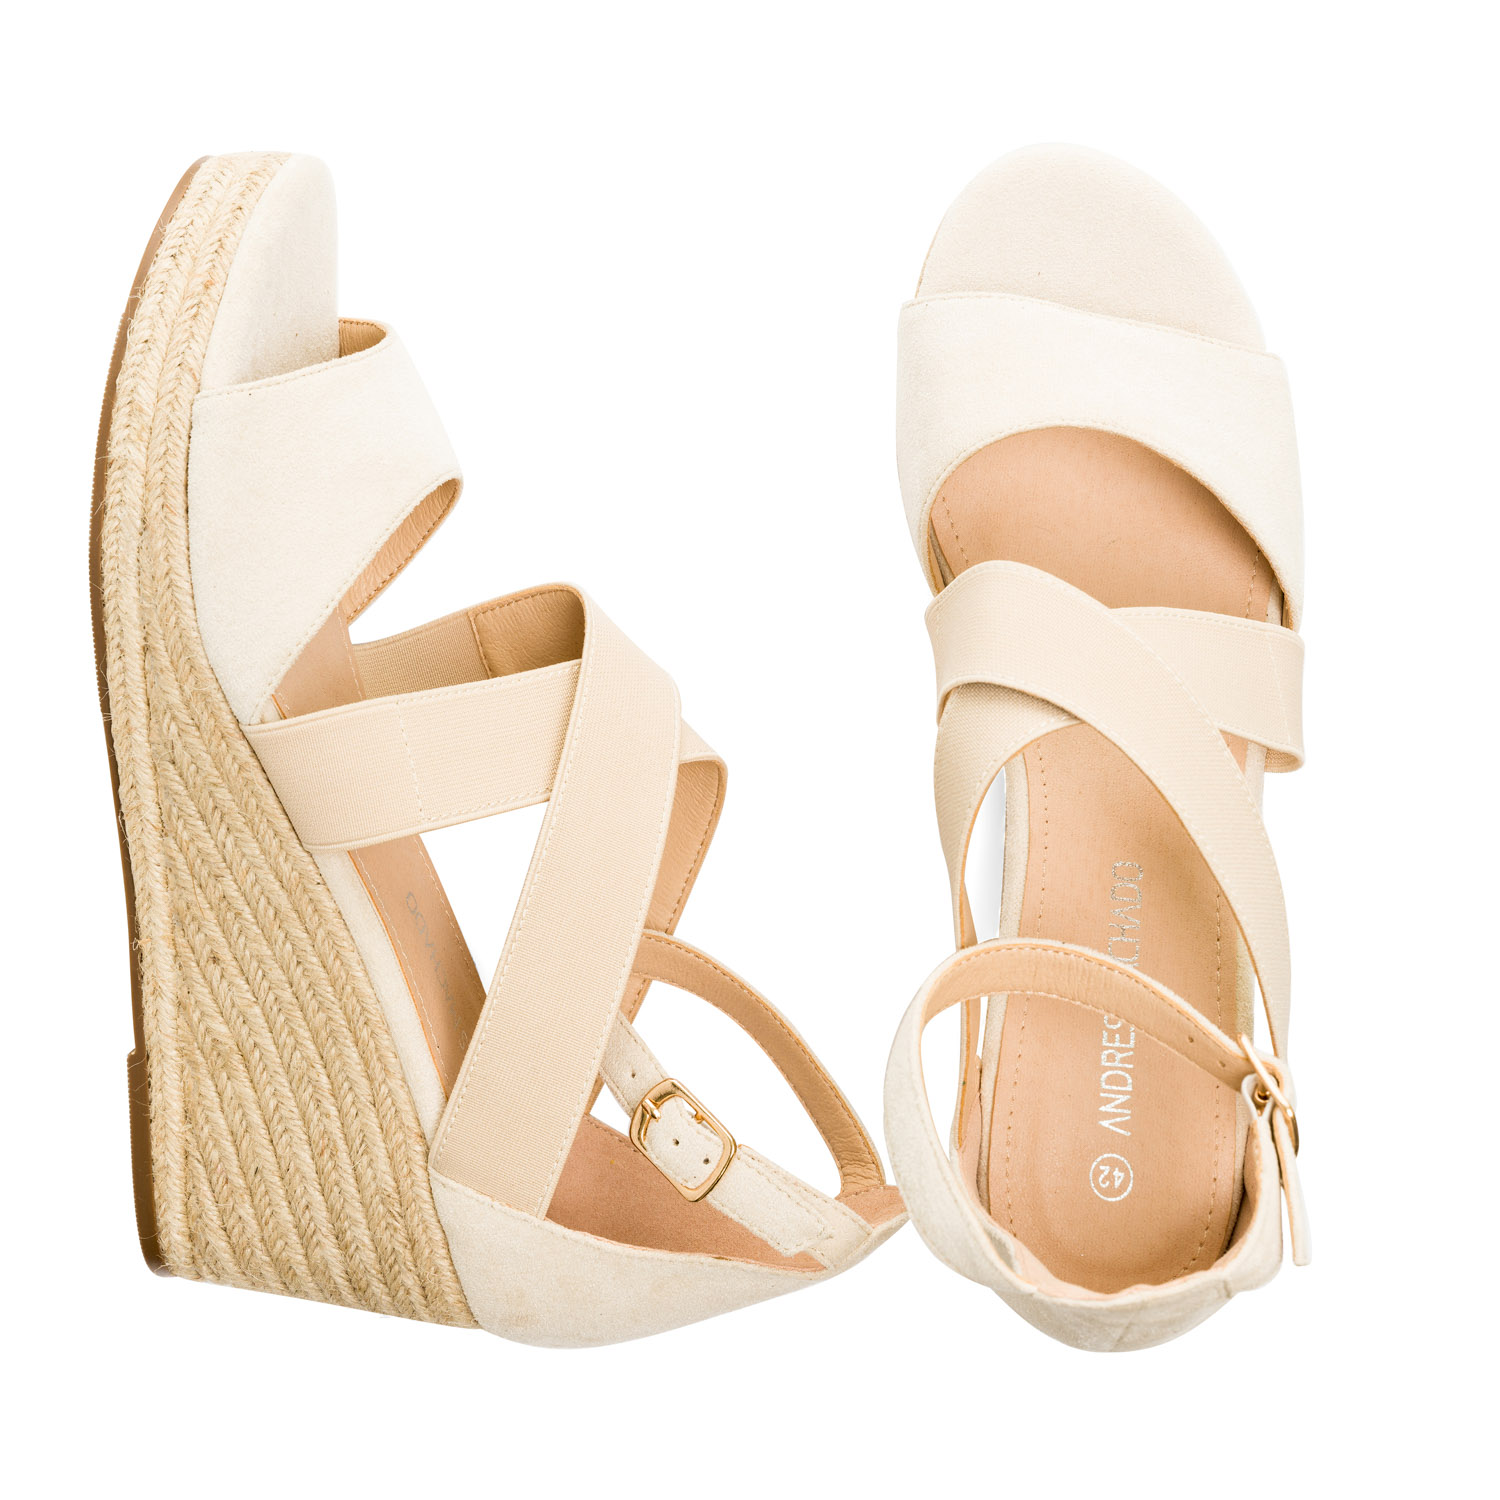 Off-white faux suede espadrilles with jute wedge 